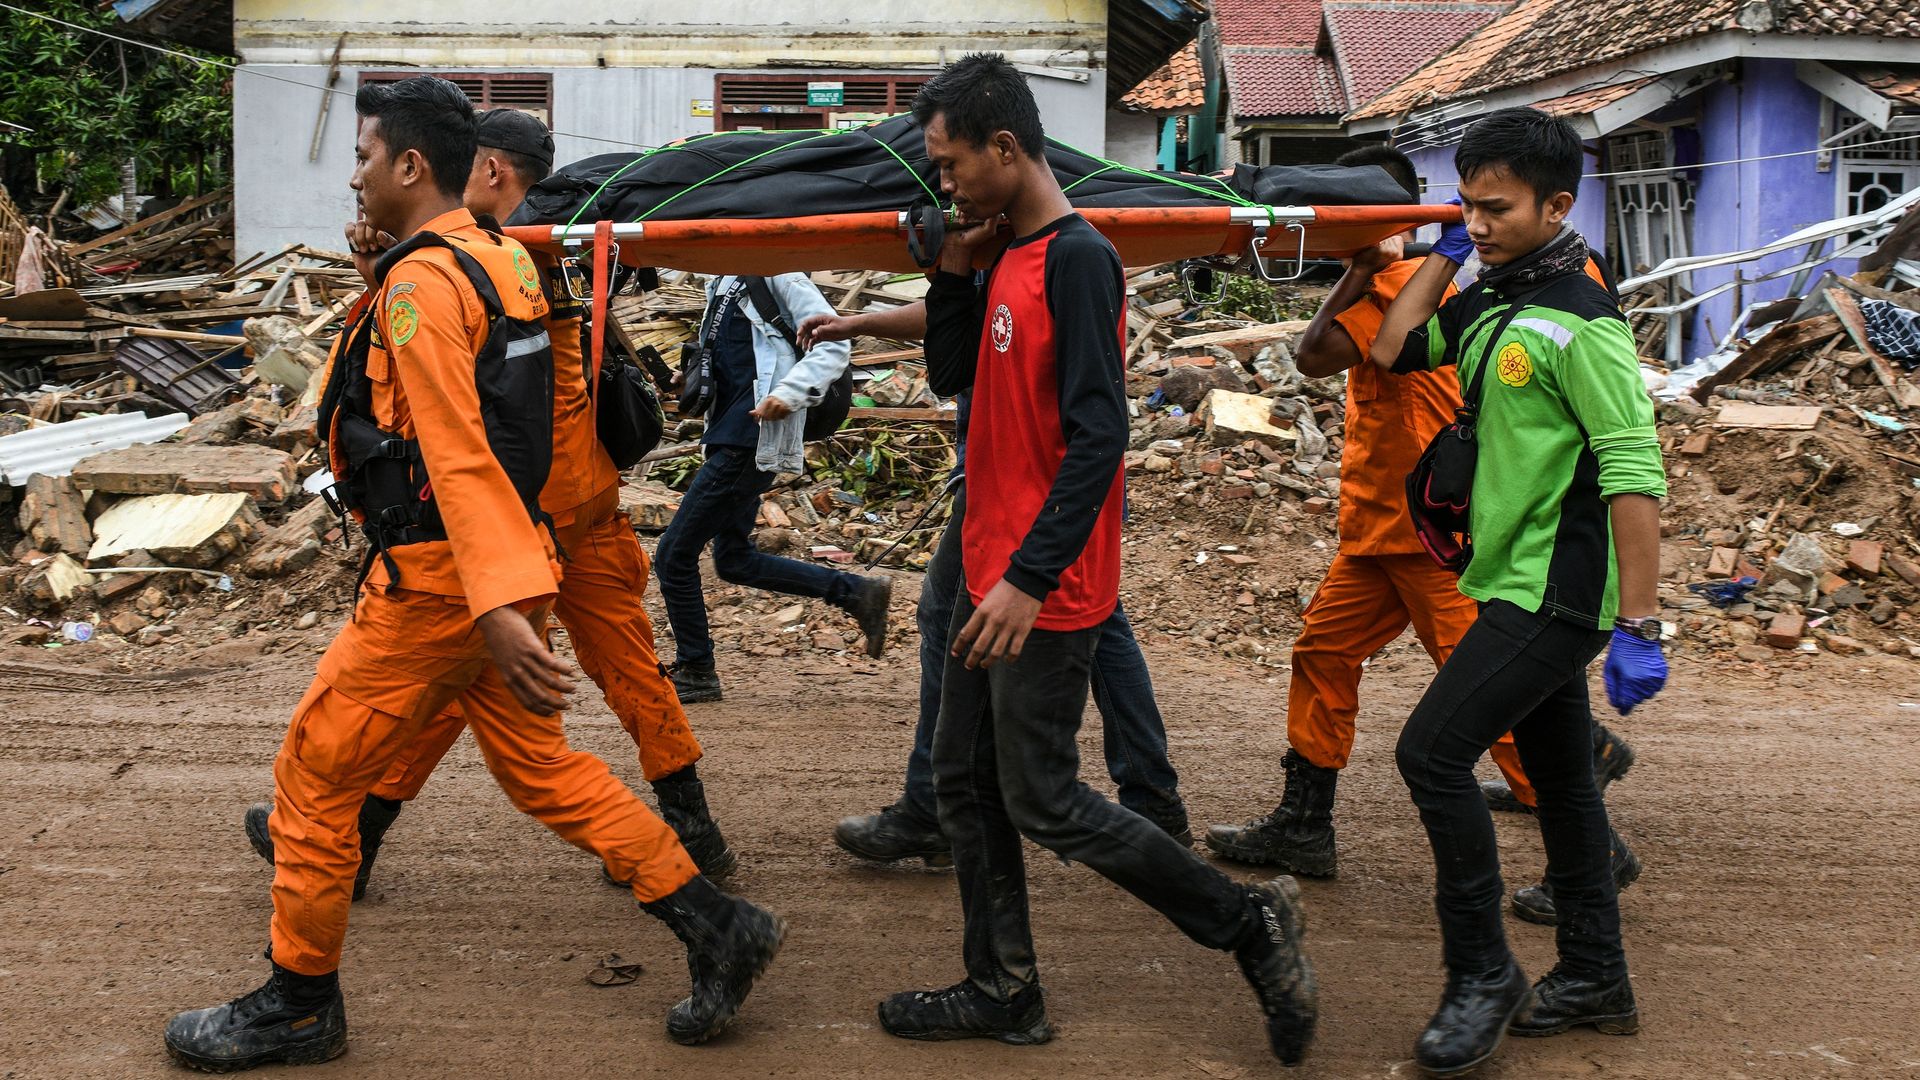 Men carrying a stretcher with a body bag